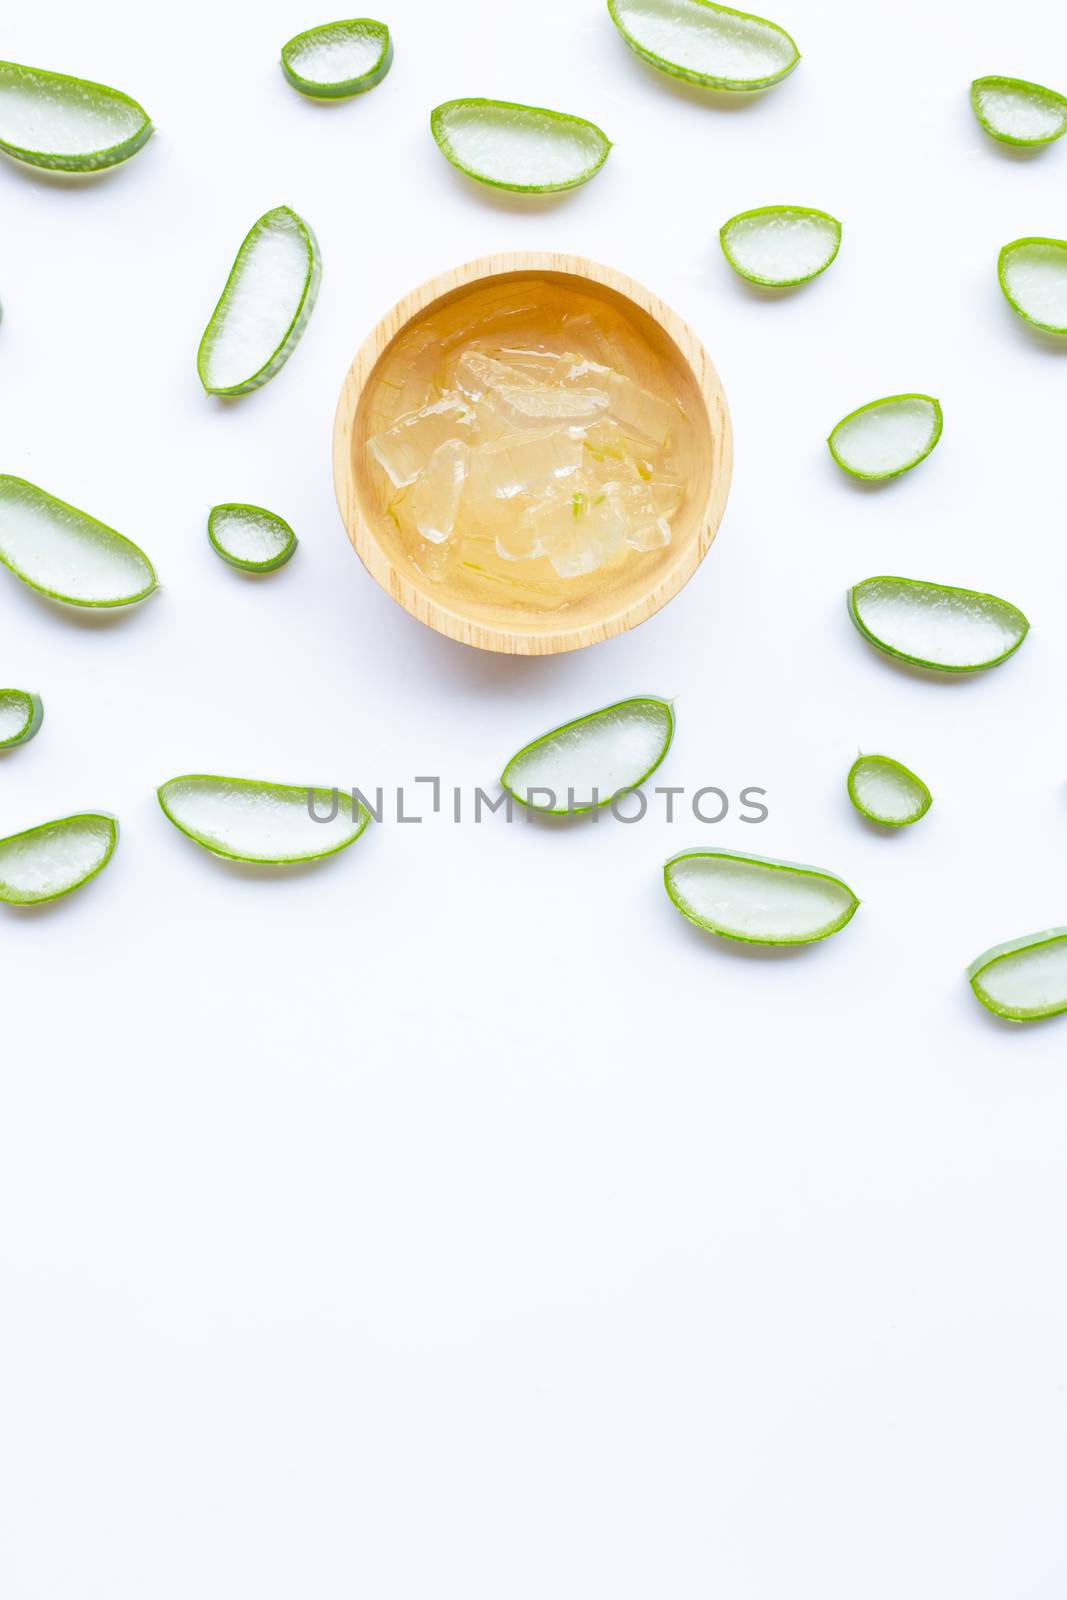 Aloe vera slices with aloe vera gel in wooden bowl on white back by Bowonpat